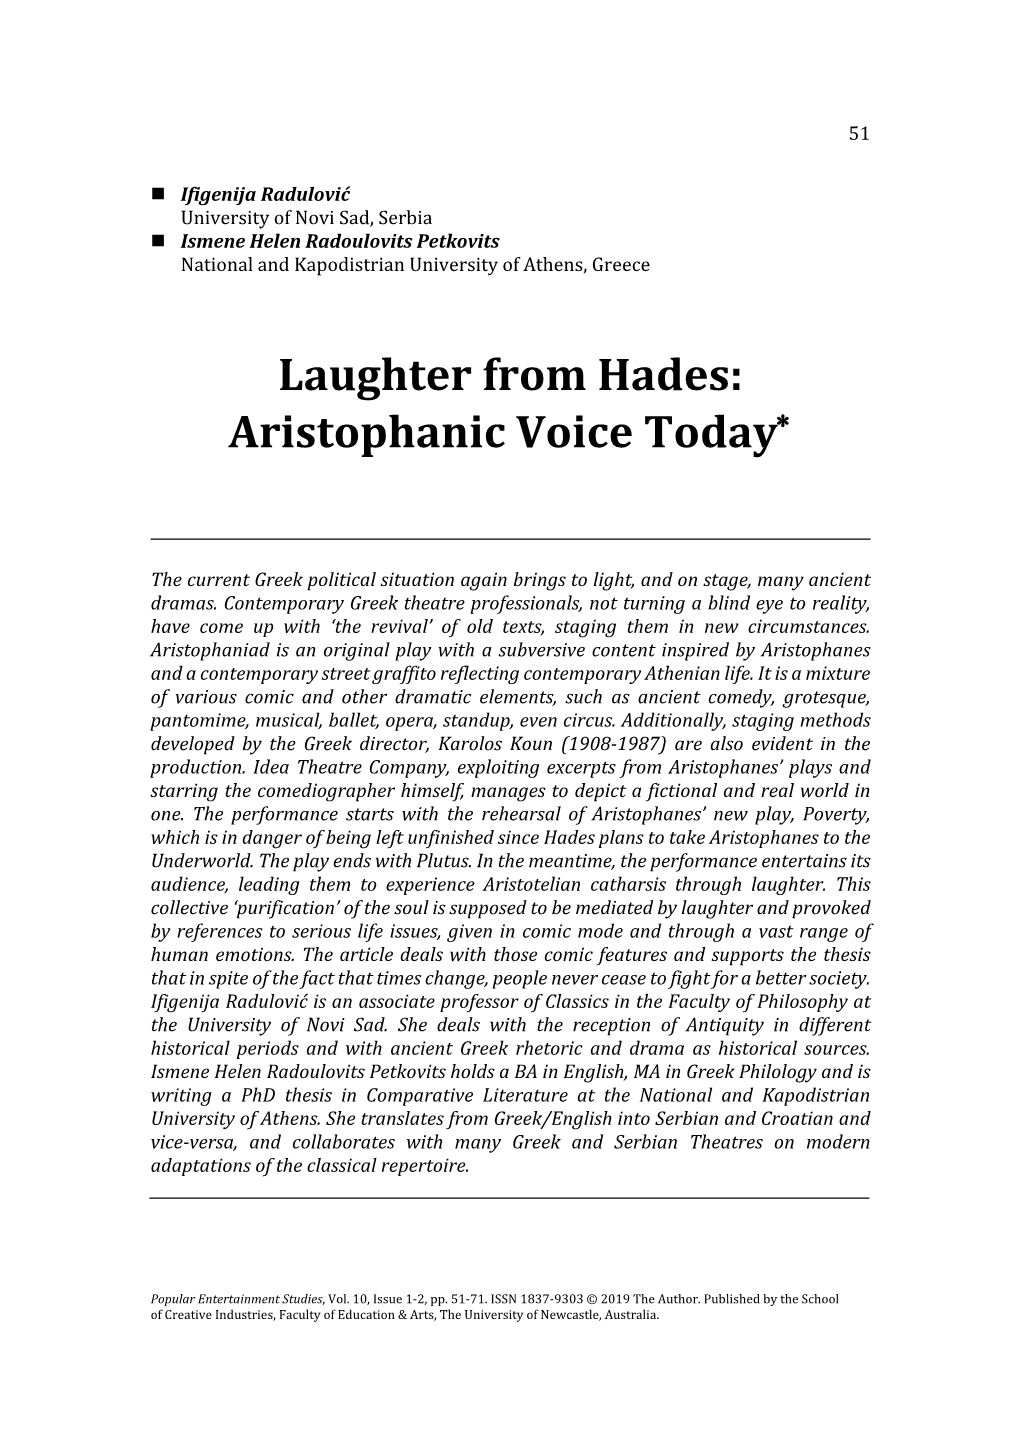 Laughter from Hades: Aristophanic Voice Today*